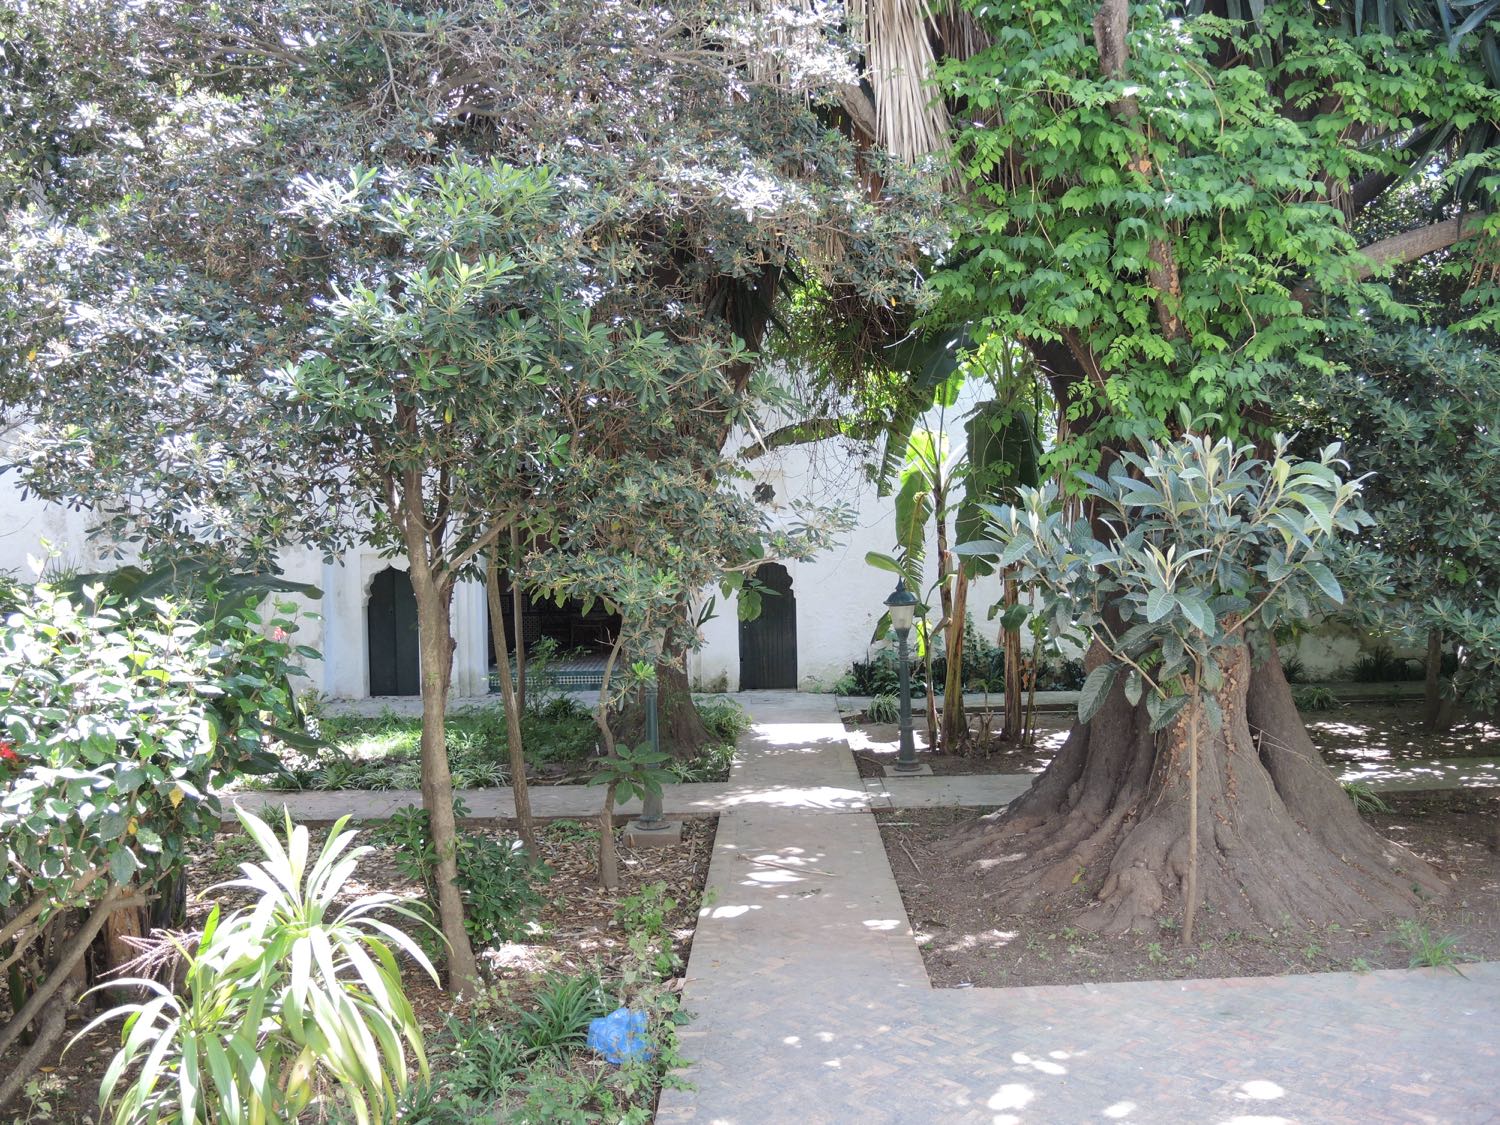  view of pathways and trees in the garden